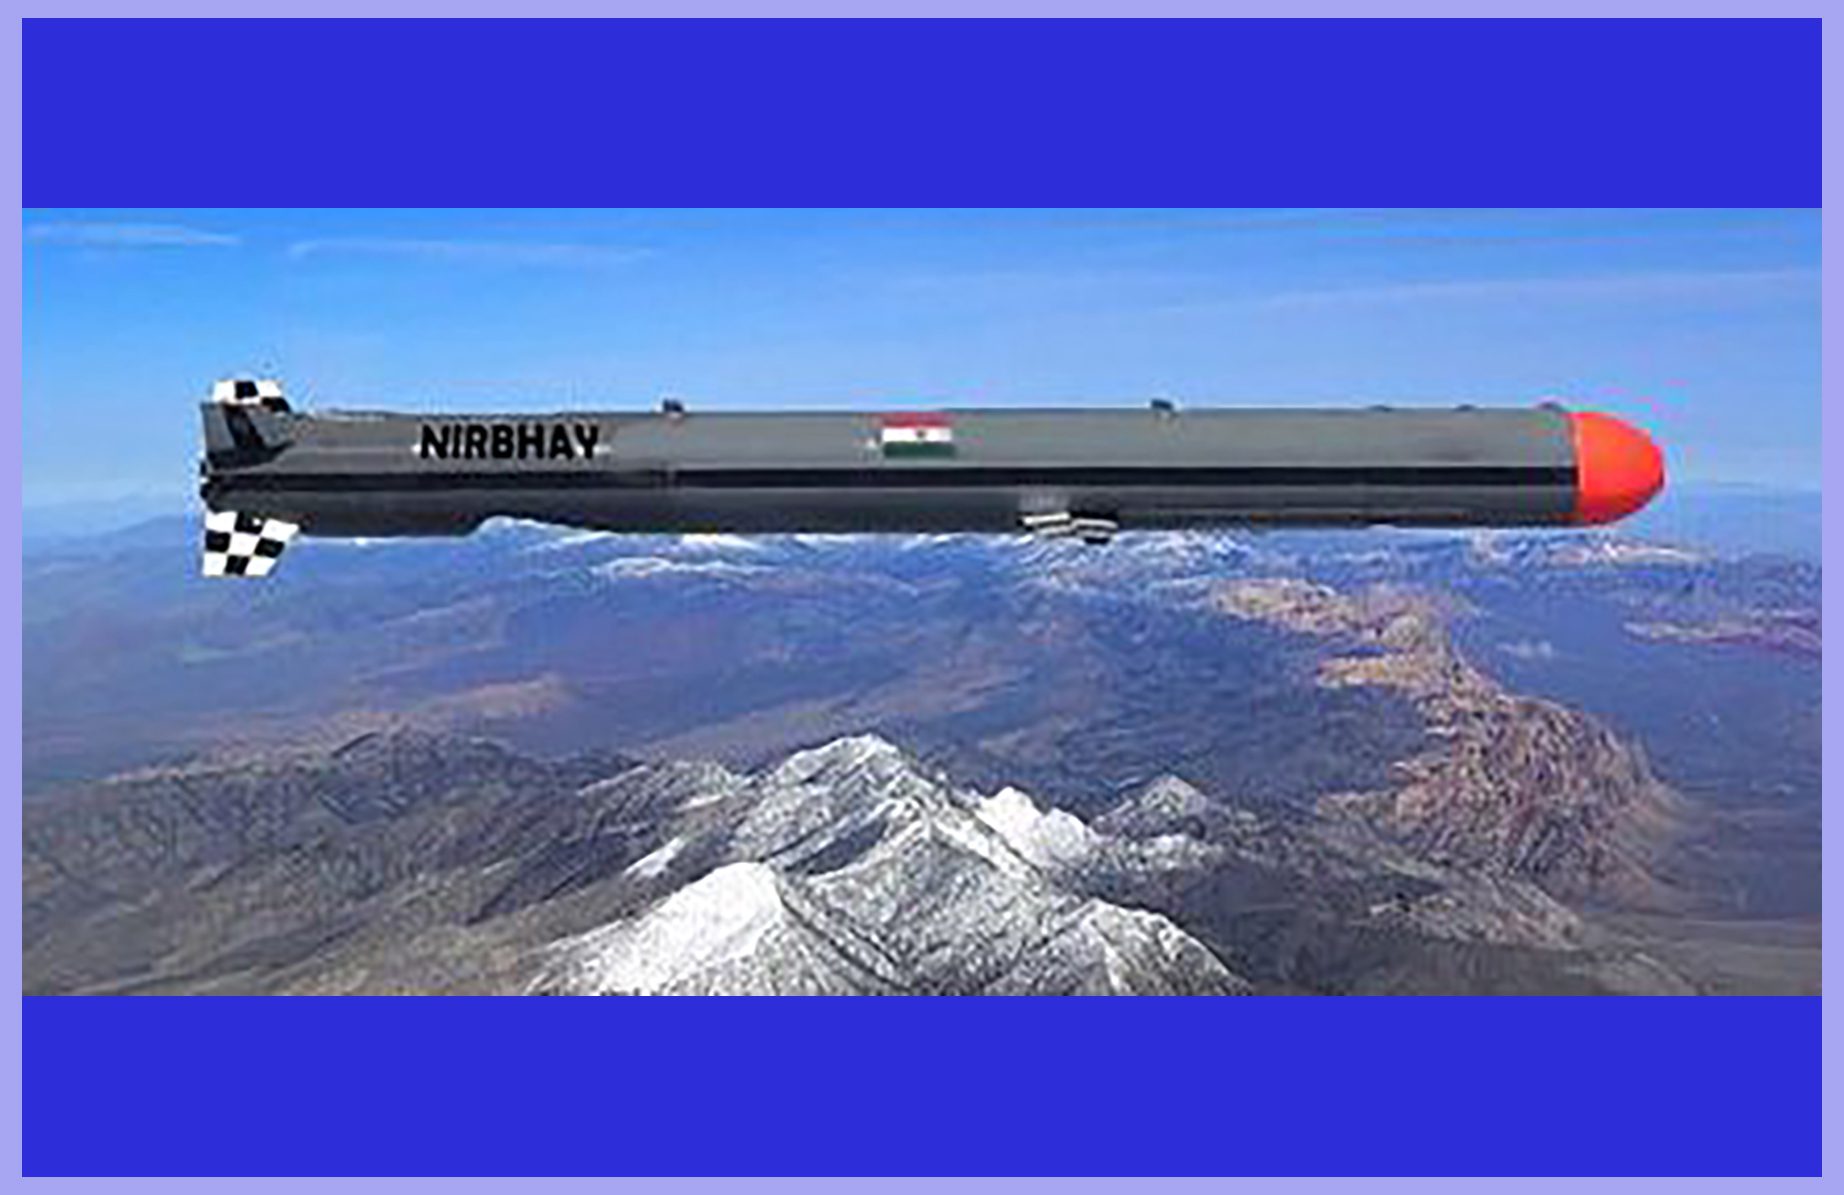 Discover the Best of the NIRBHAY Cruise Missile